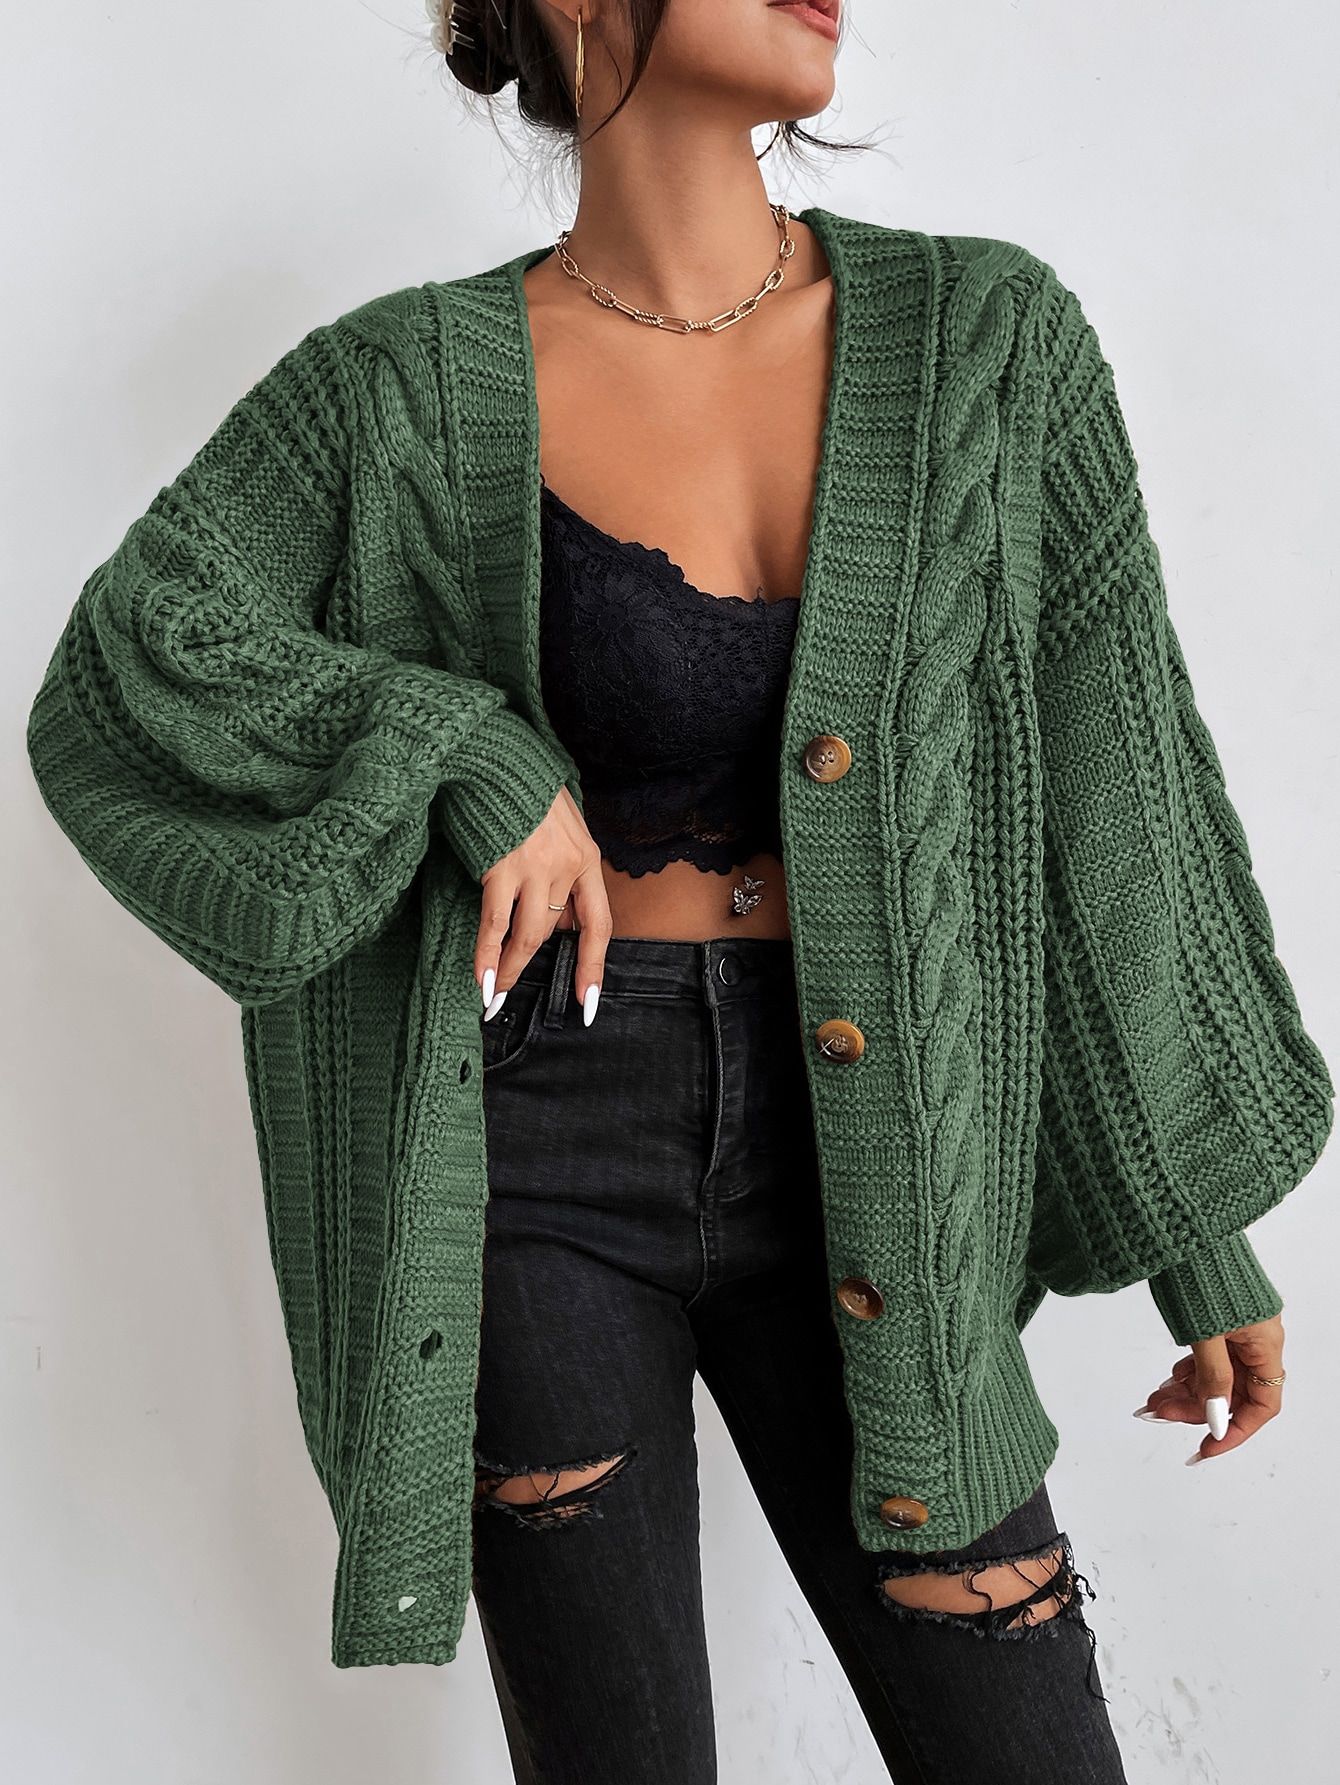 Long Cardigans: Stay Cozy and Stylish in Long Cardigans